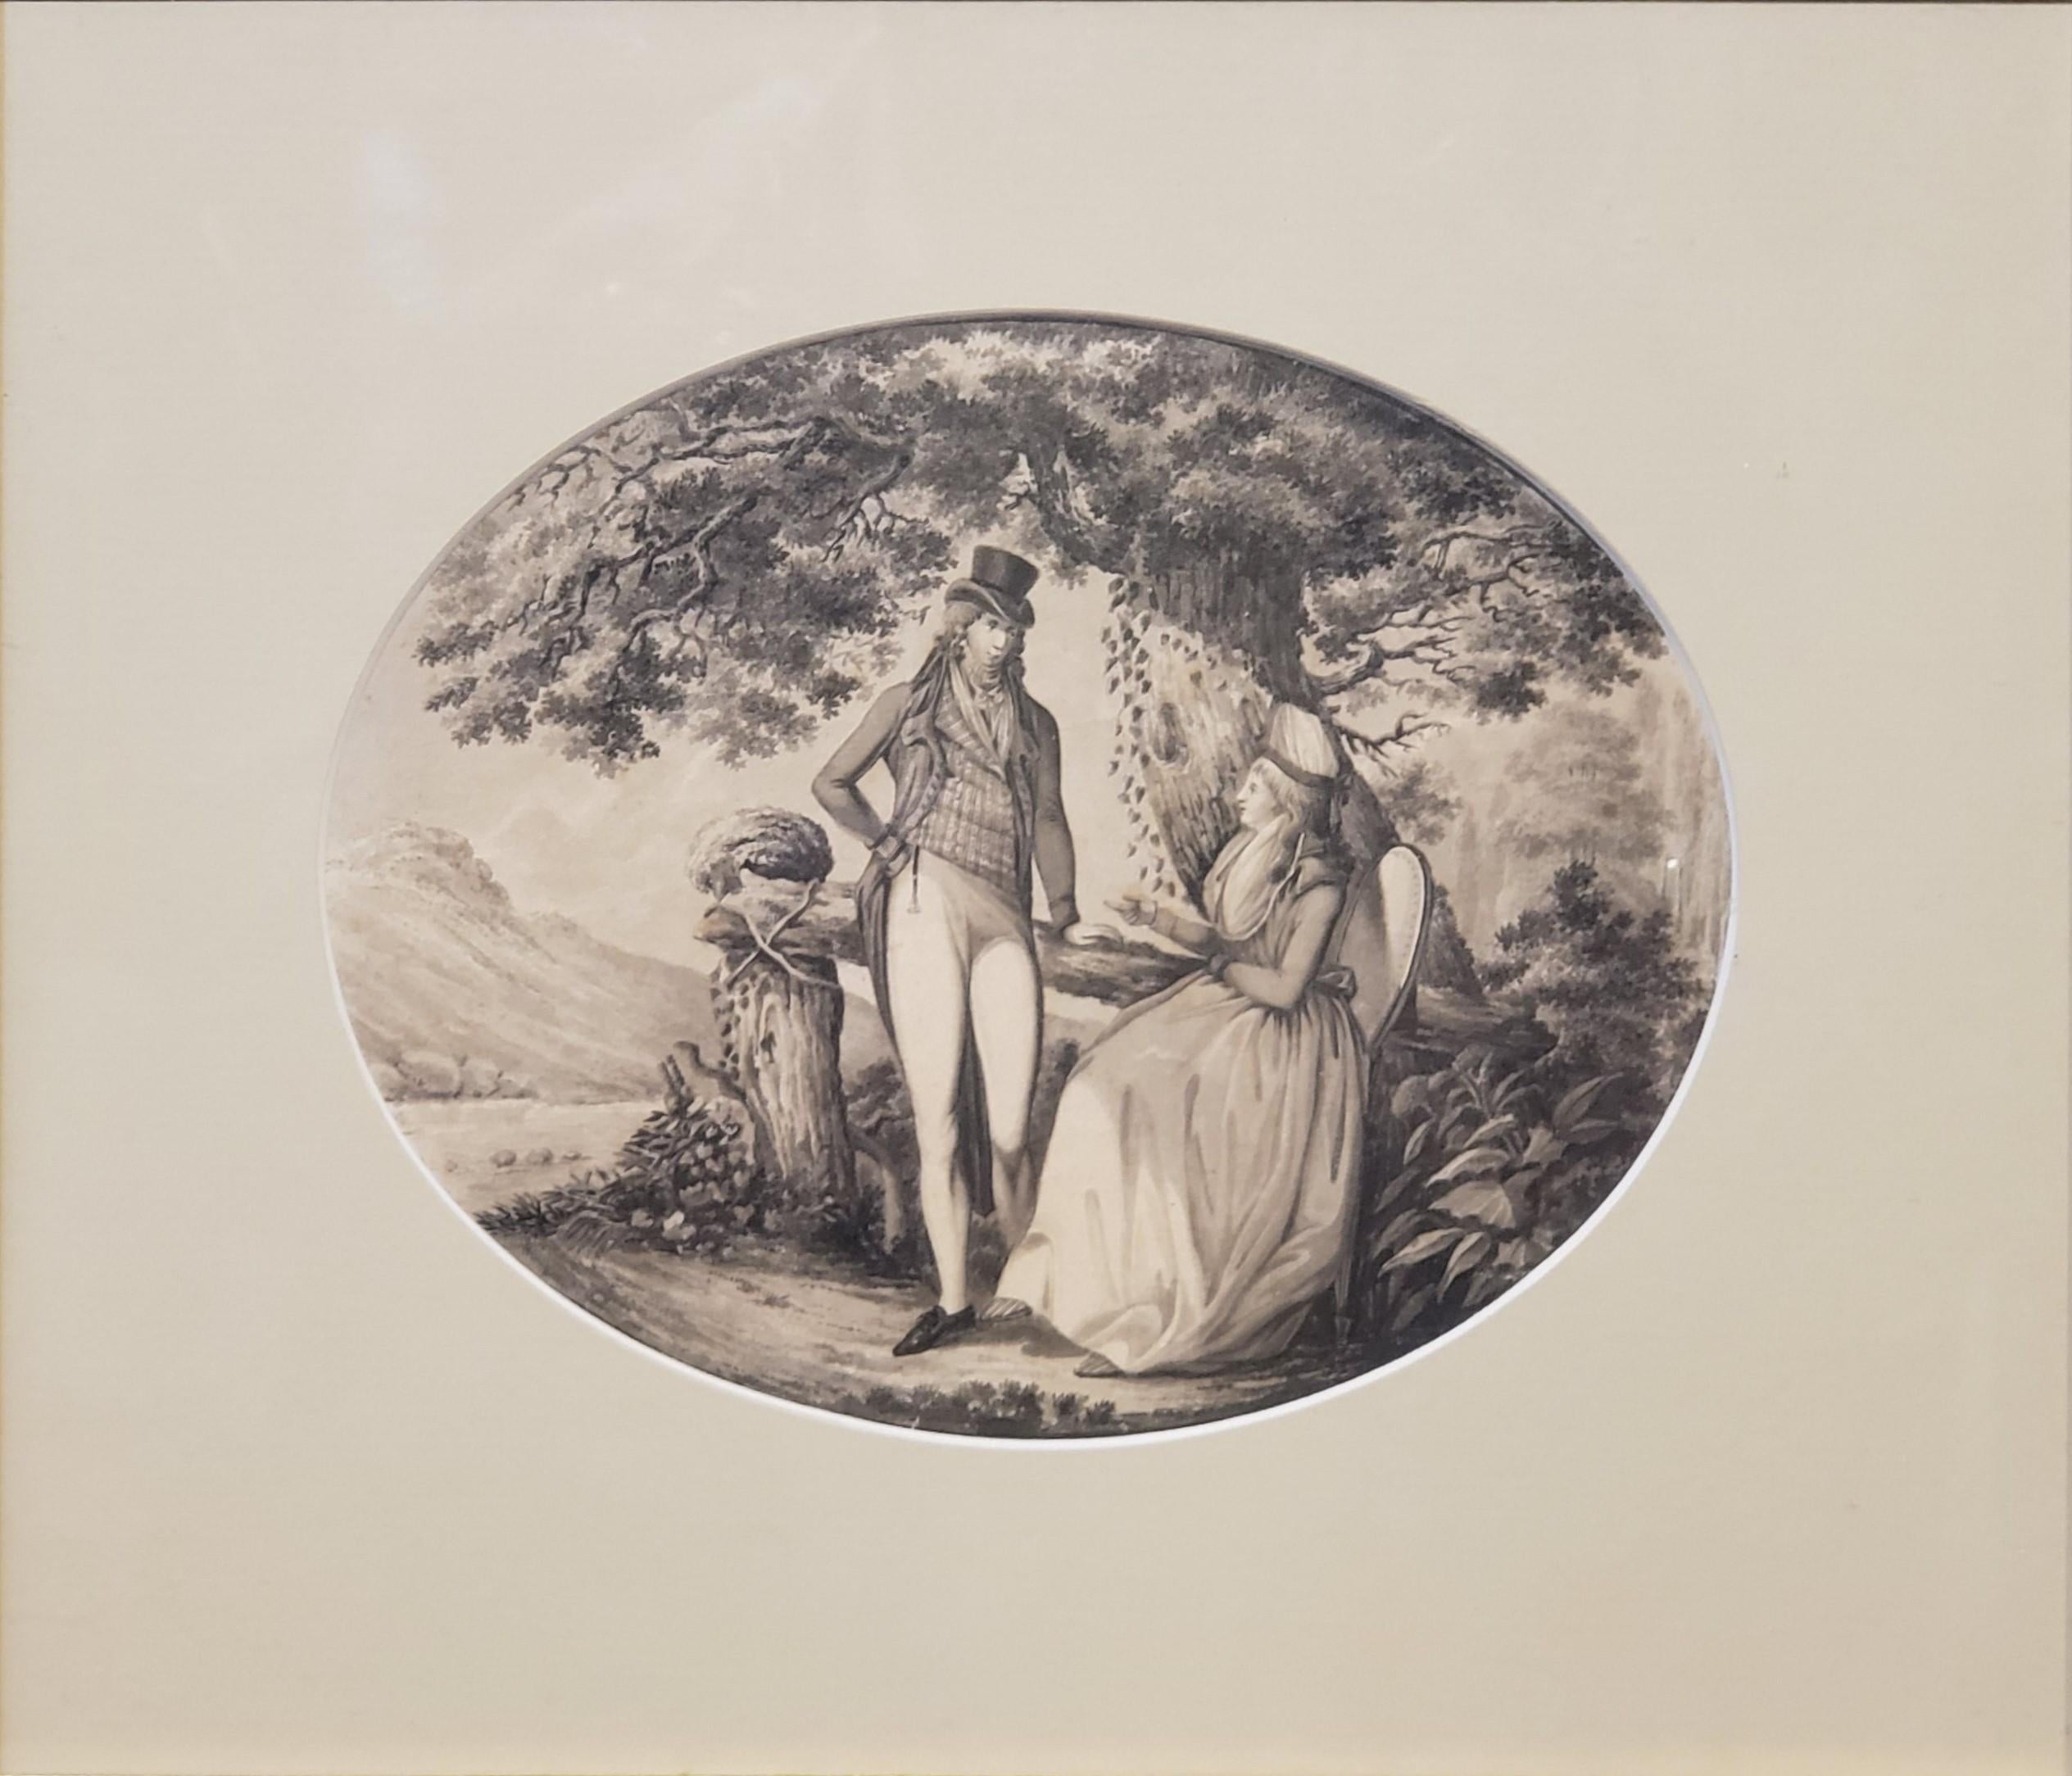 Ink Drawing of a Man Courting A Woman Signed by B. Koller dated 1796 - Art by B Koller